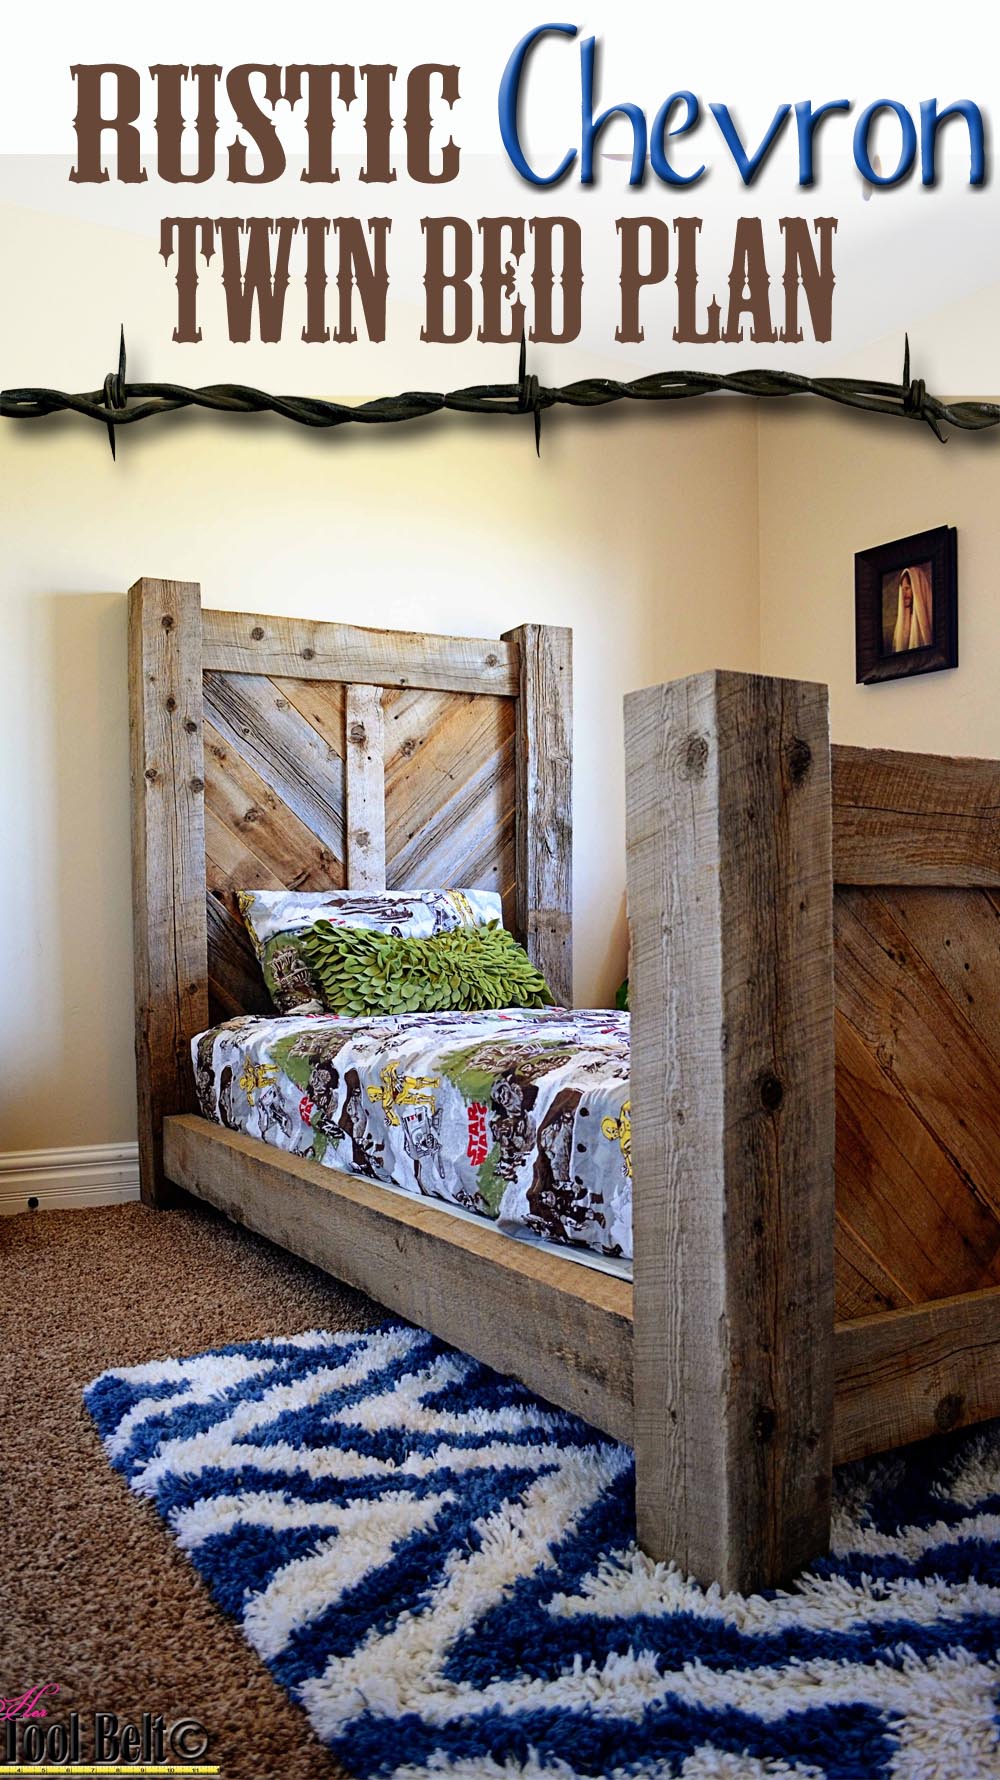 Rustic Barnwood Twin Bed Plan Her, How To Make Your Own Rustic Bed Frame